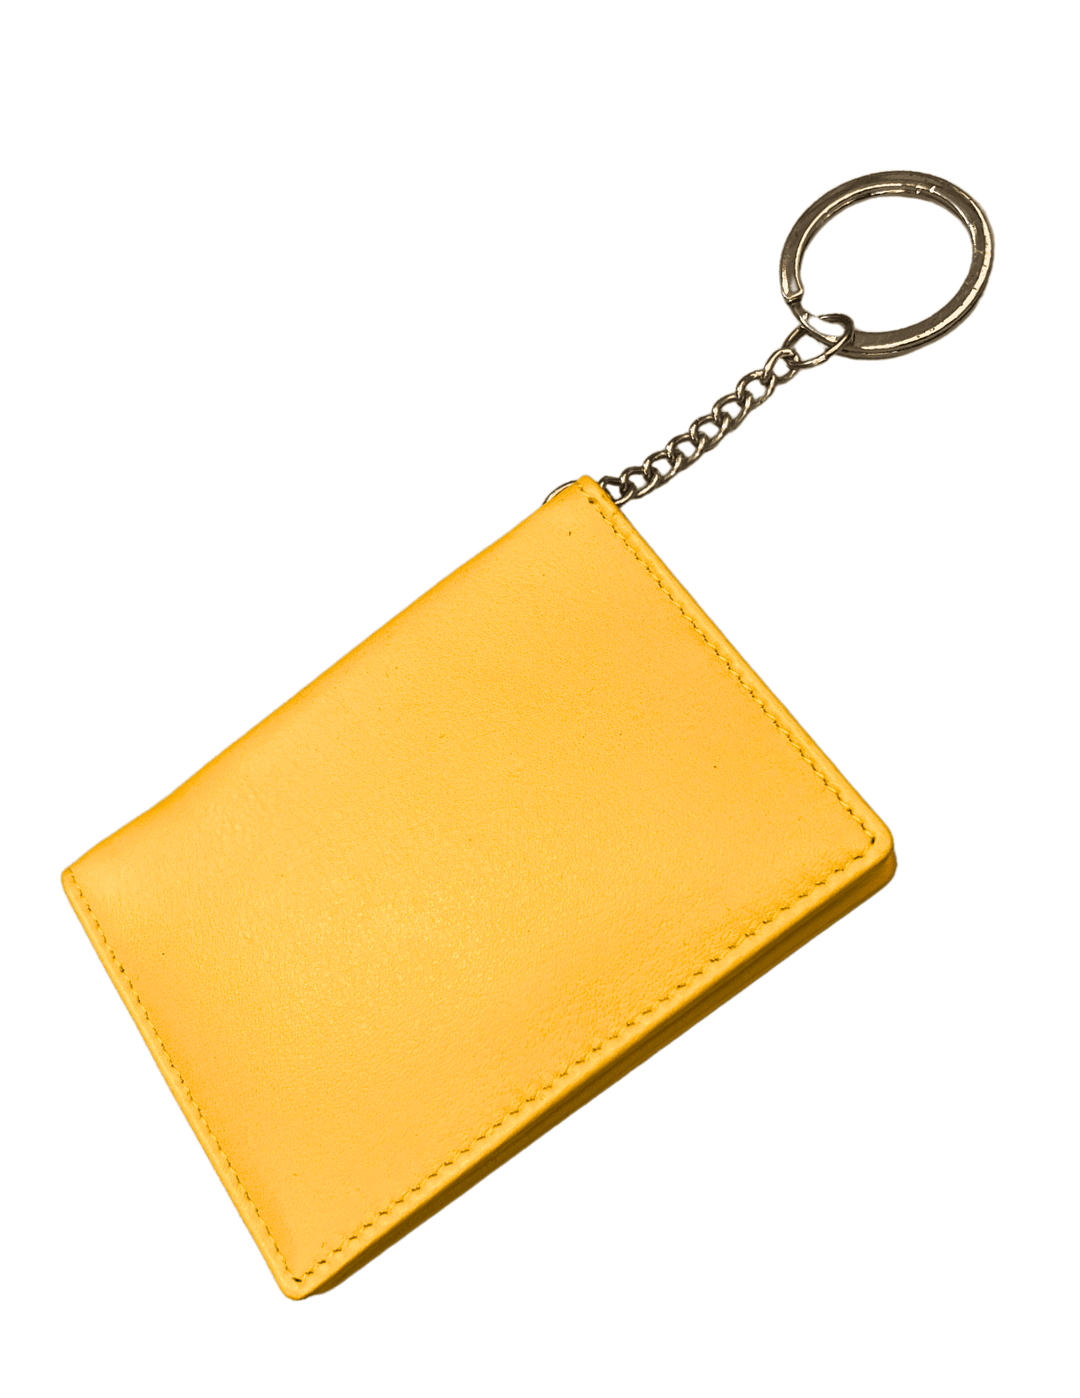 Sunshine yellow card holder with key ring leather goods gifts for women